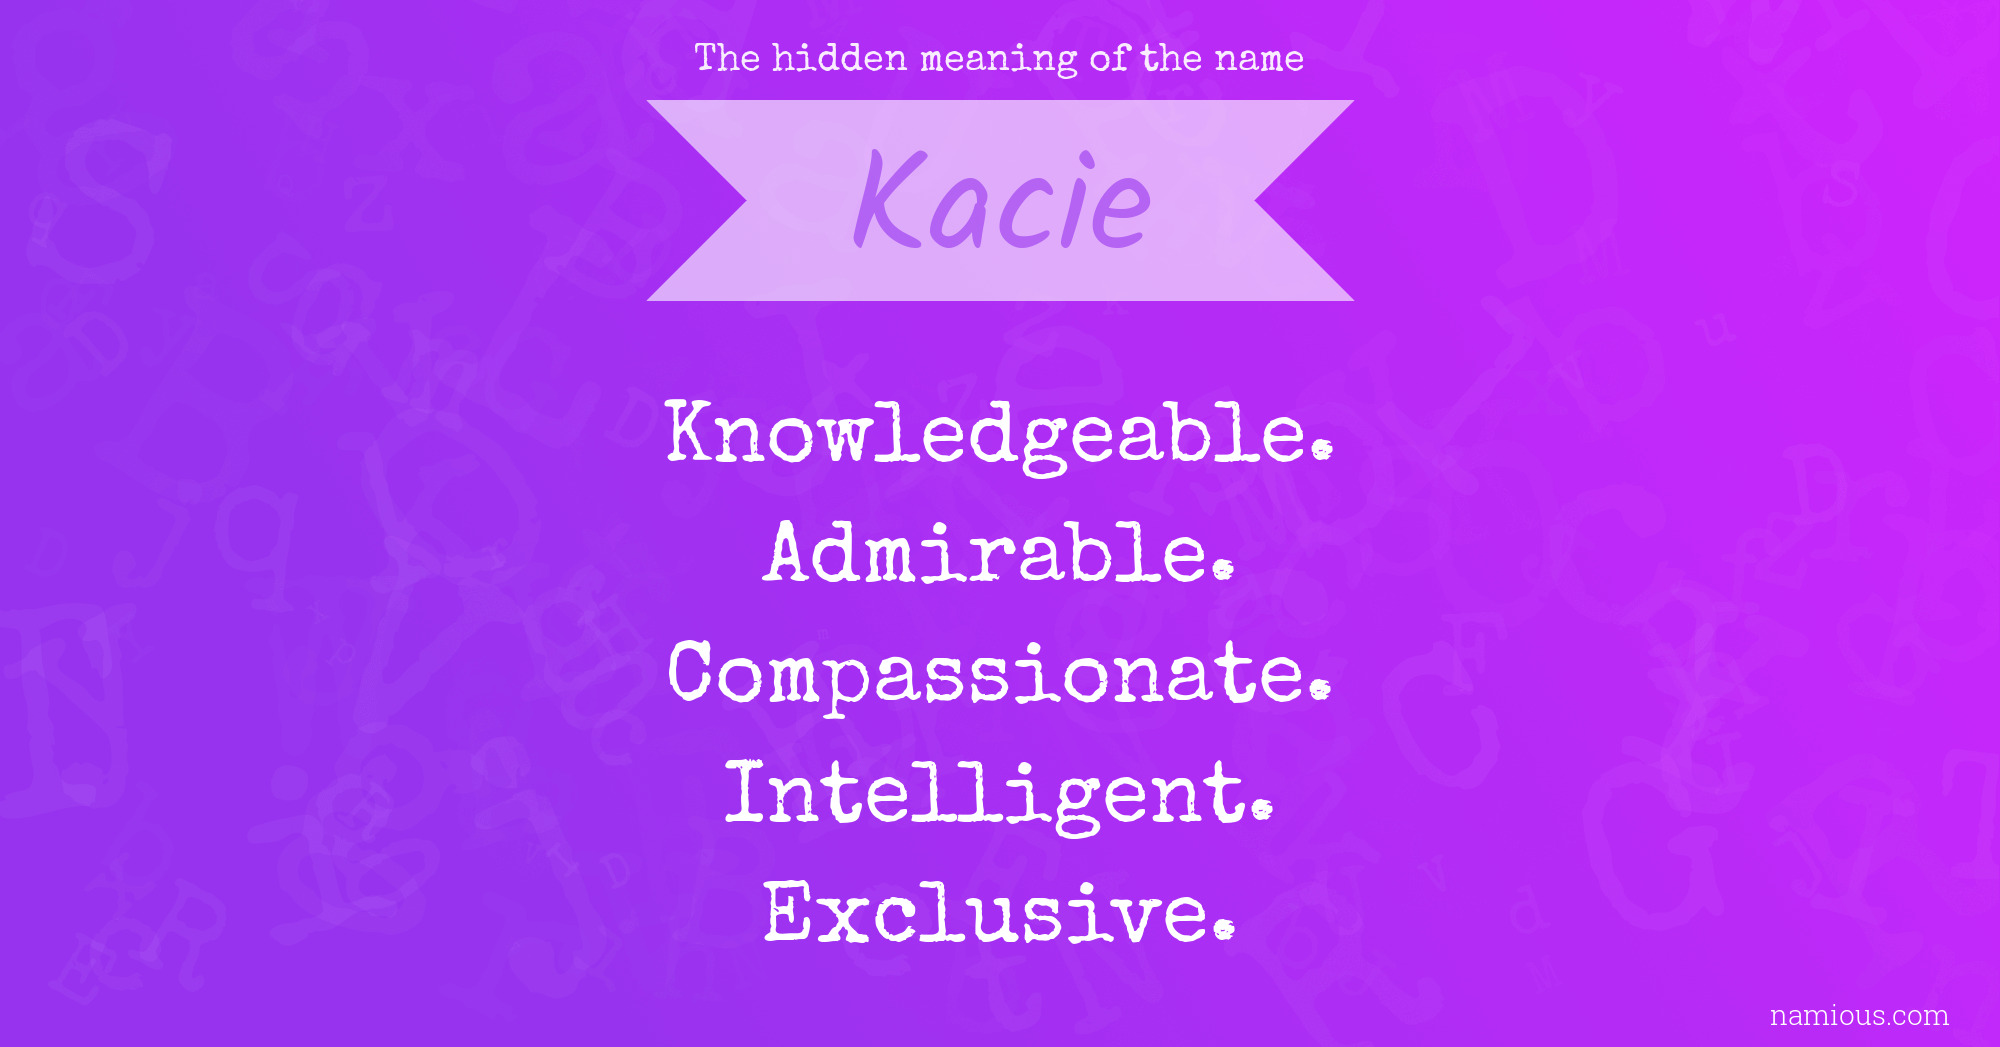 The hidden meaning of the name Kacie